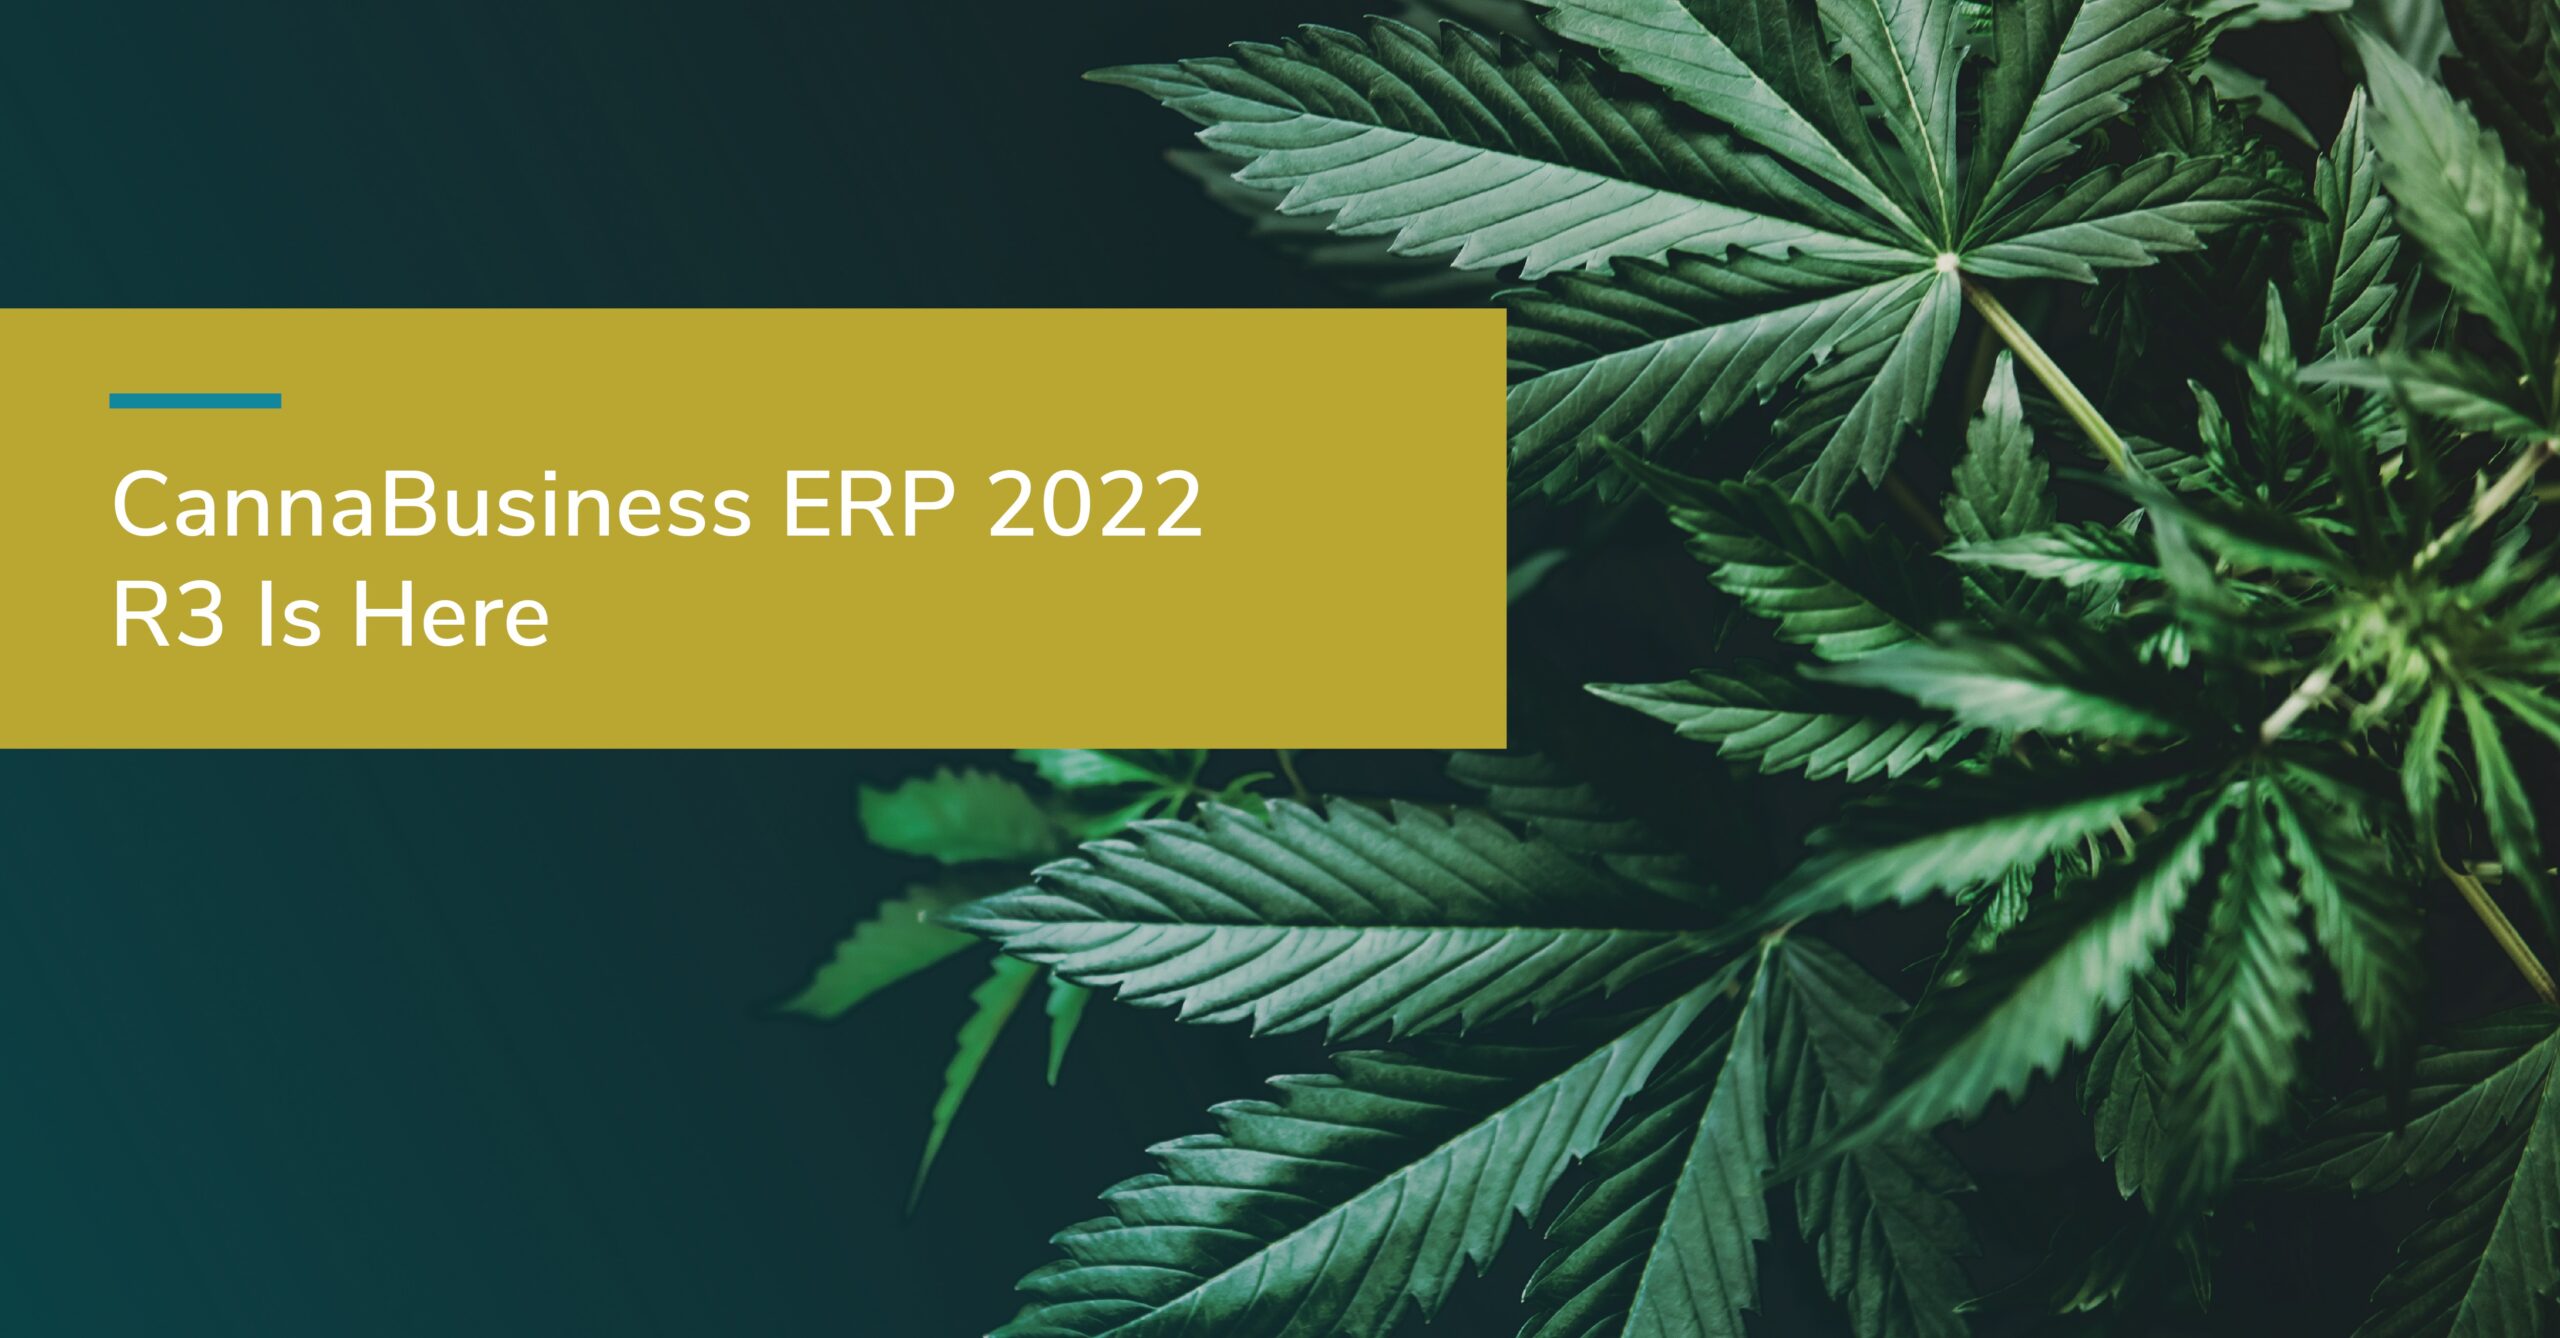 Cannabusiness ERP 2022 R3 Is Here